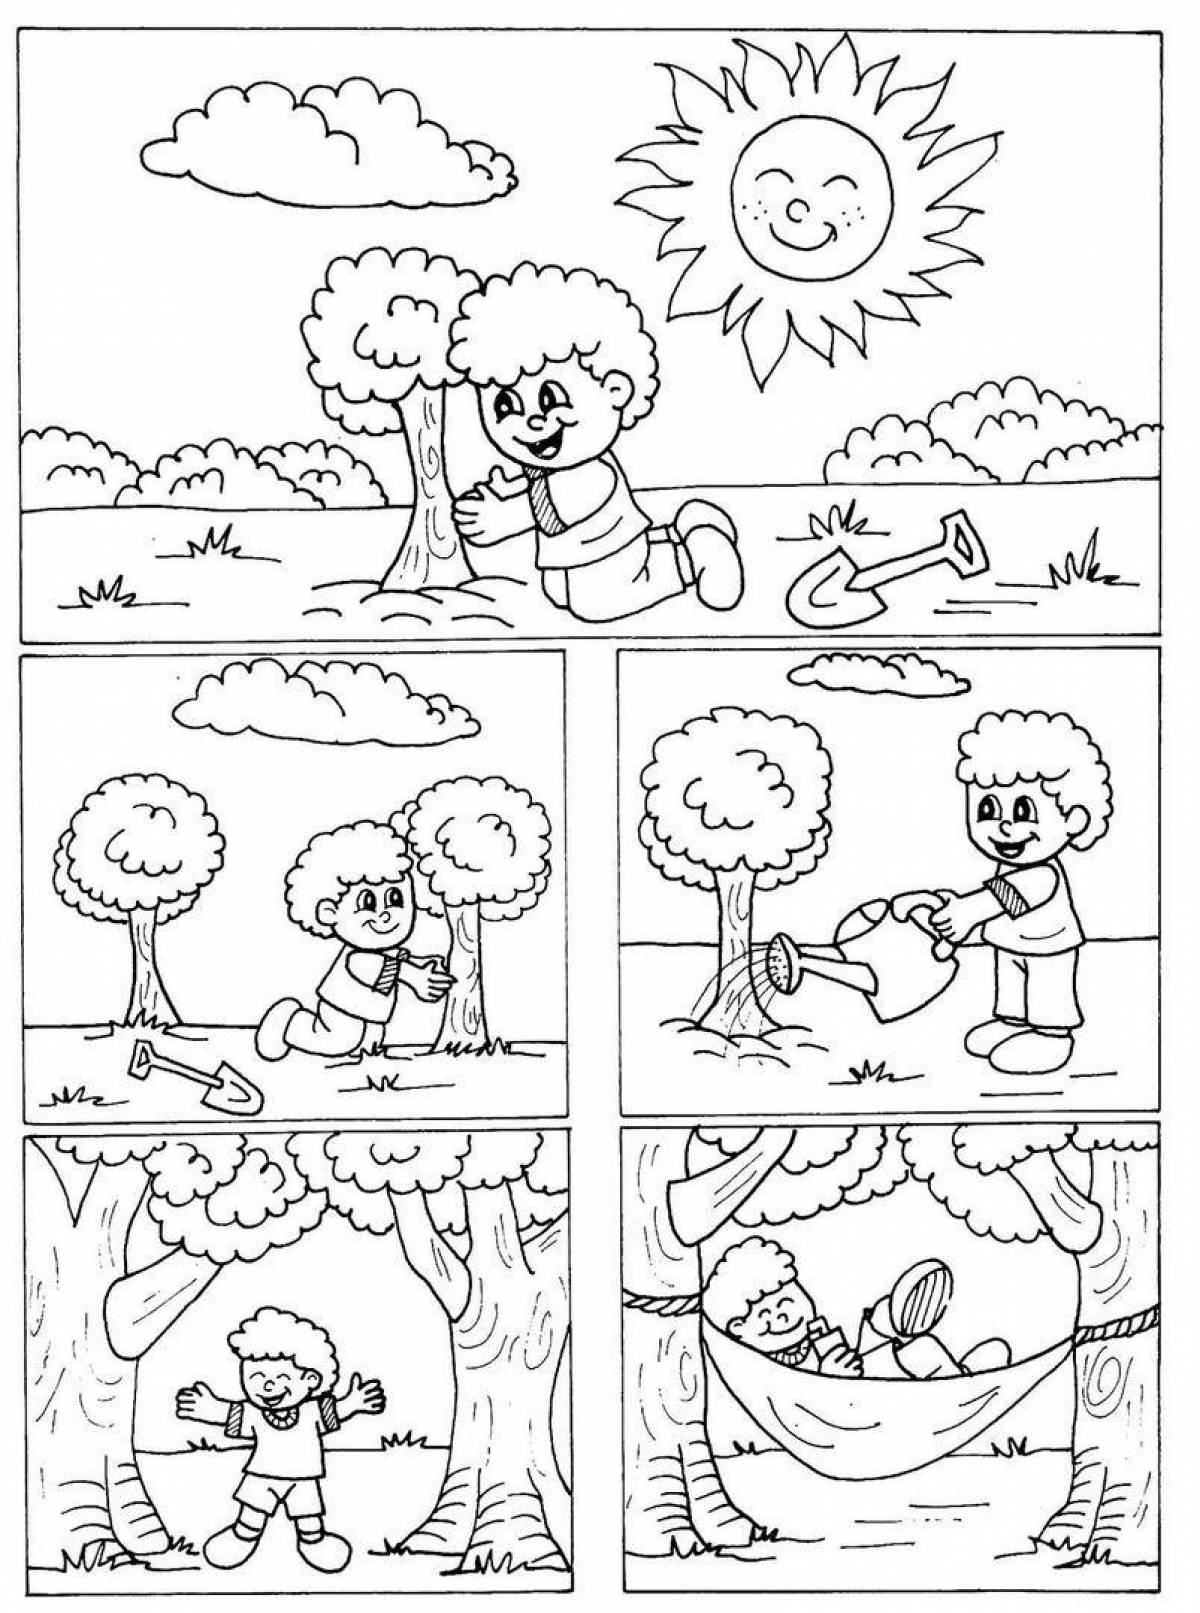 Shining Care for Nature Coloring Page for Toddlers